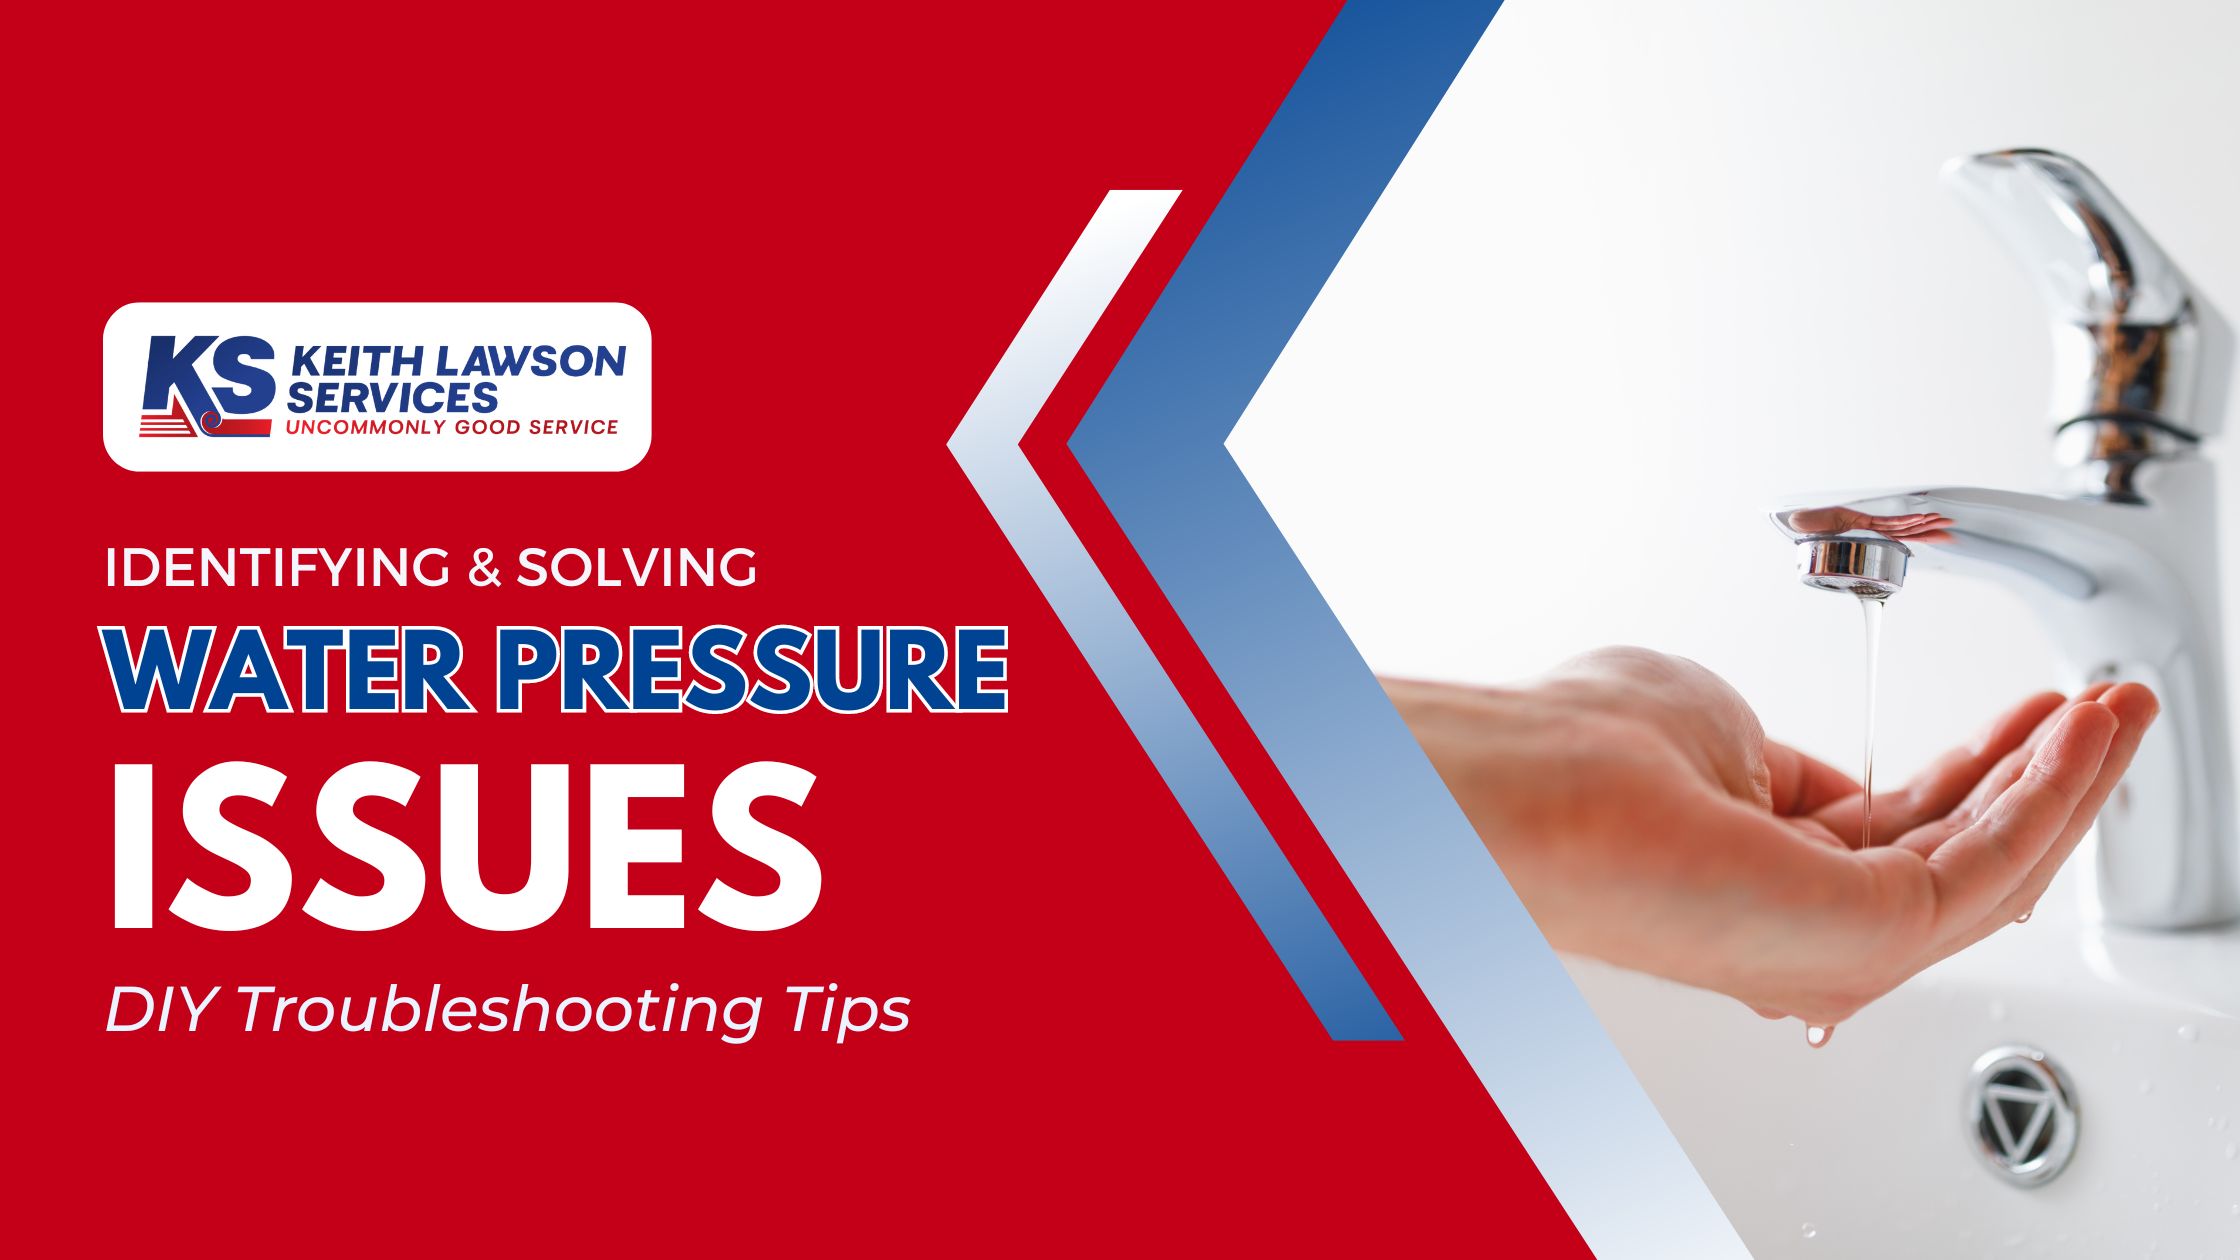 Identifying and Solving Water Pressure Issues: DIY Troubleshooting Tips